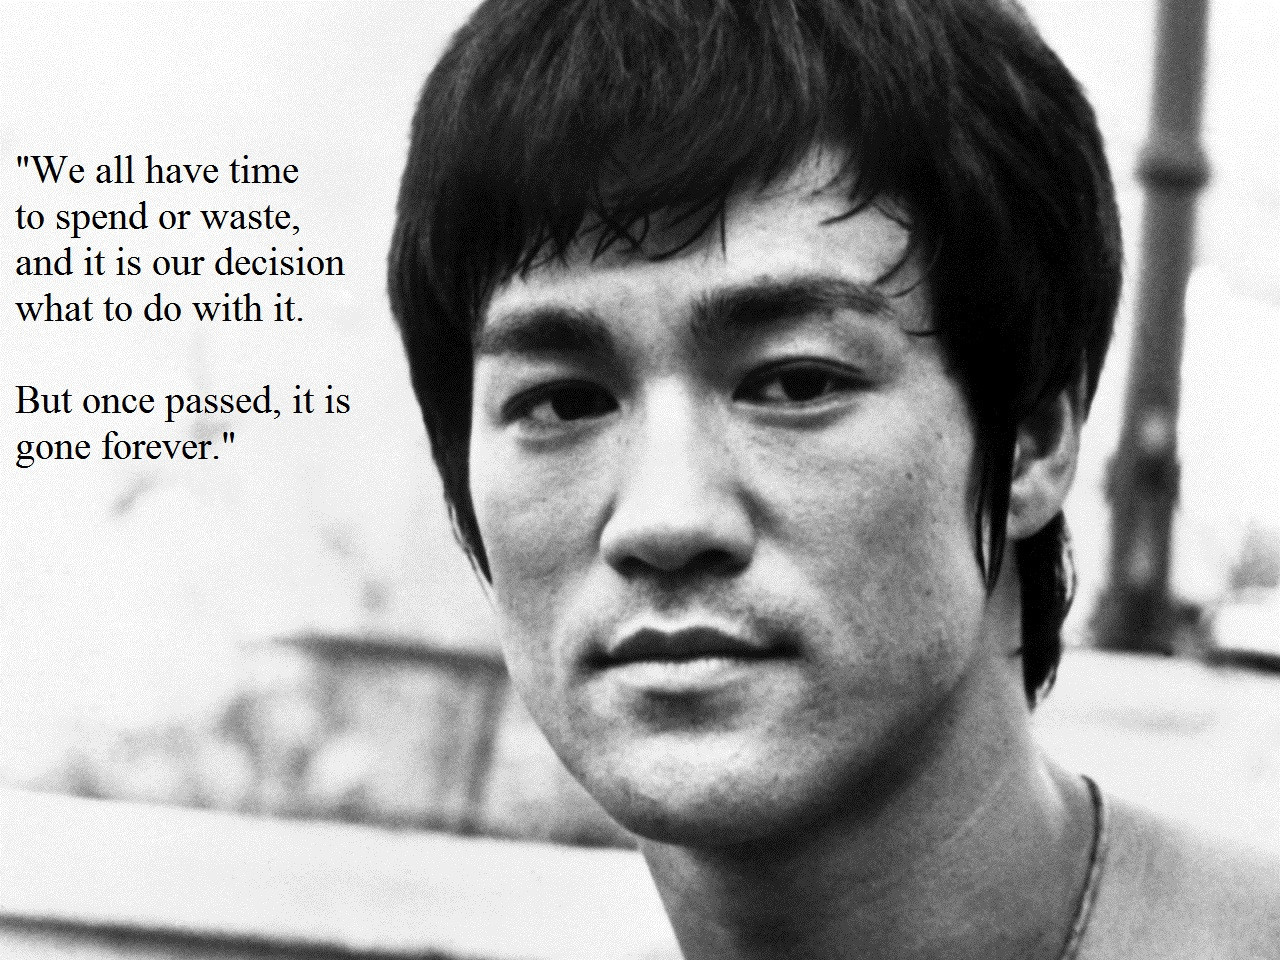 Motivational Bruce Lee | Funny Pictures, Quotes, Pics, Photos, Images.  Videos of Really Very Cute animals.